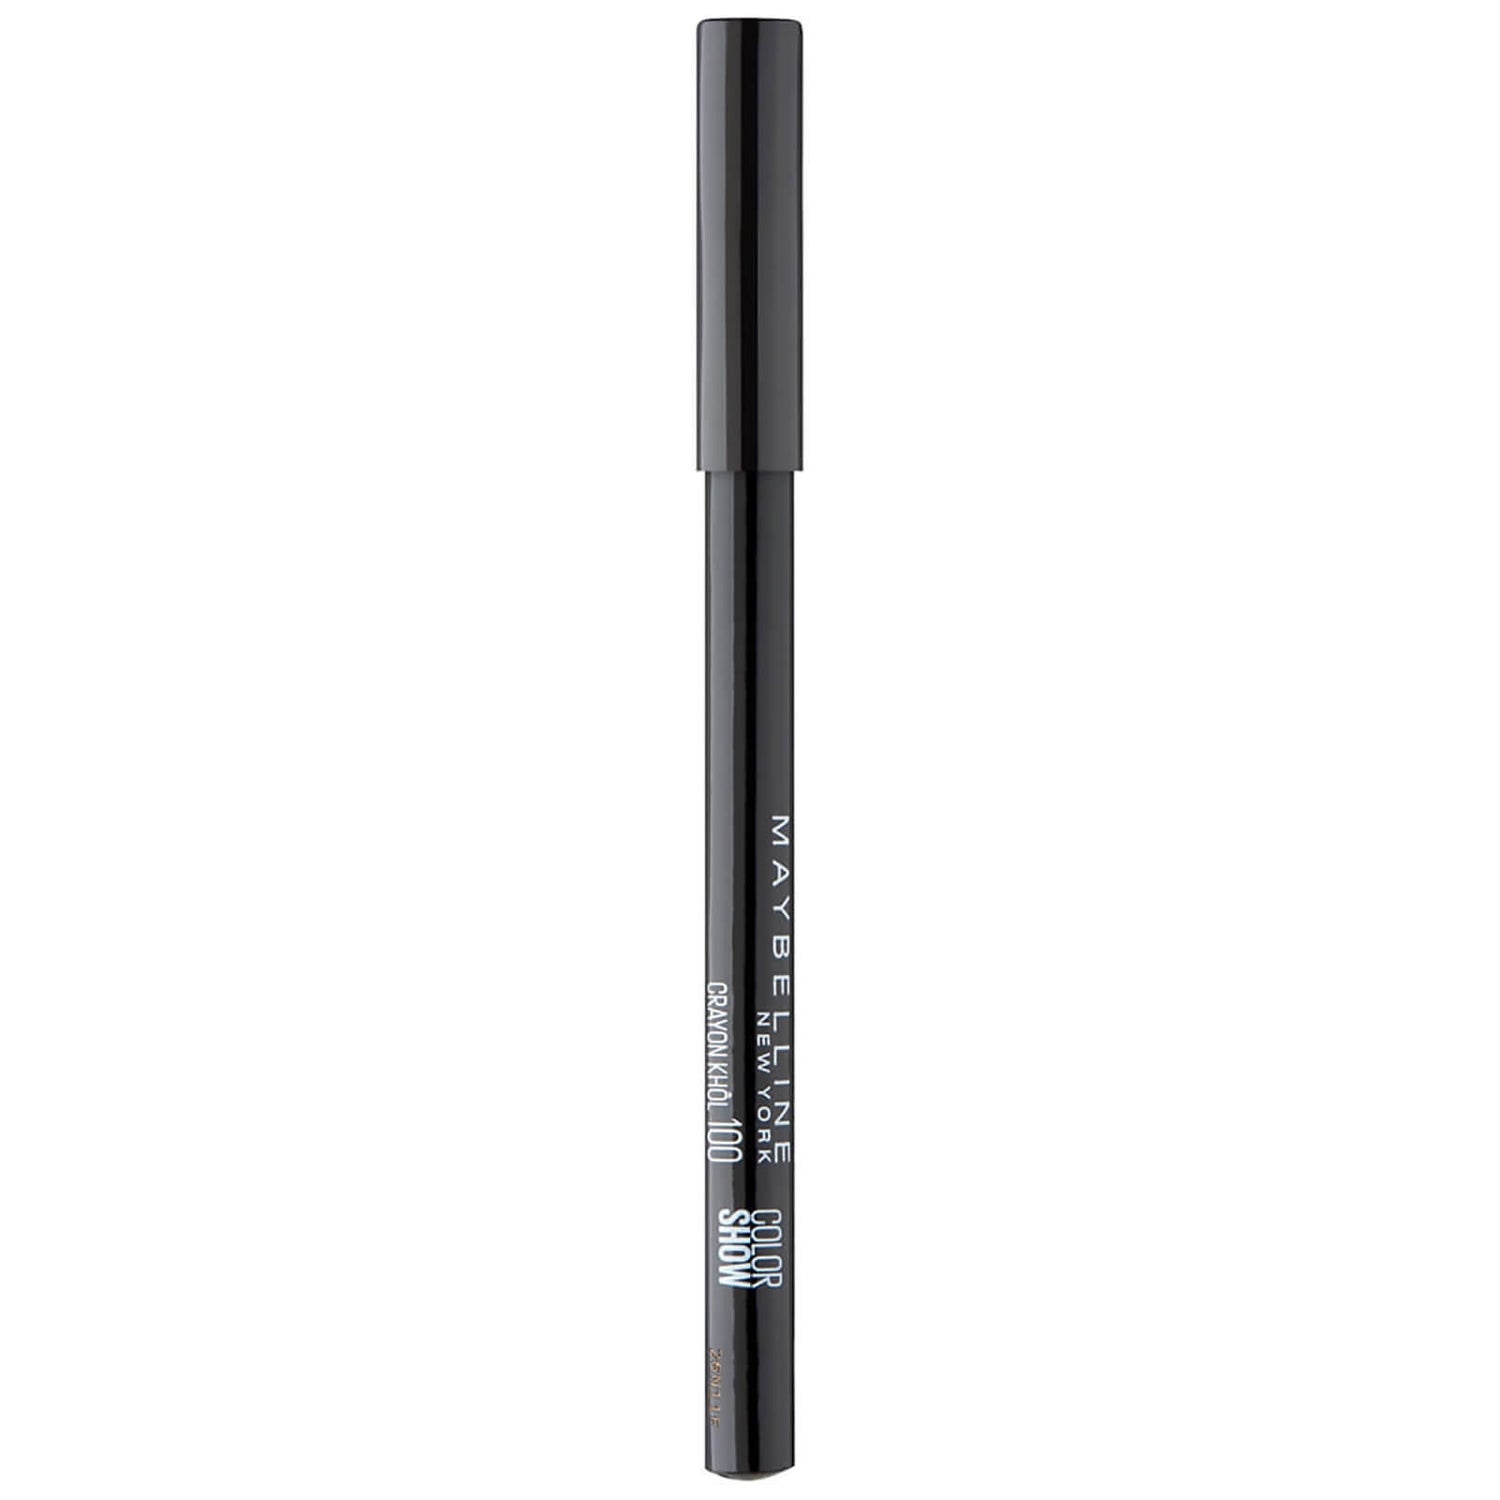 Maybelline Color Show Kohl Eyeliner 5g (Various Shades)